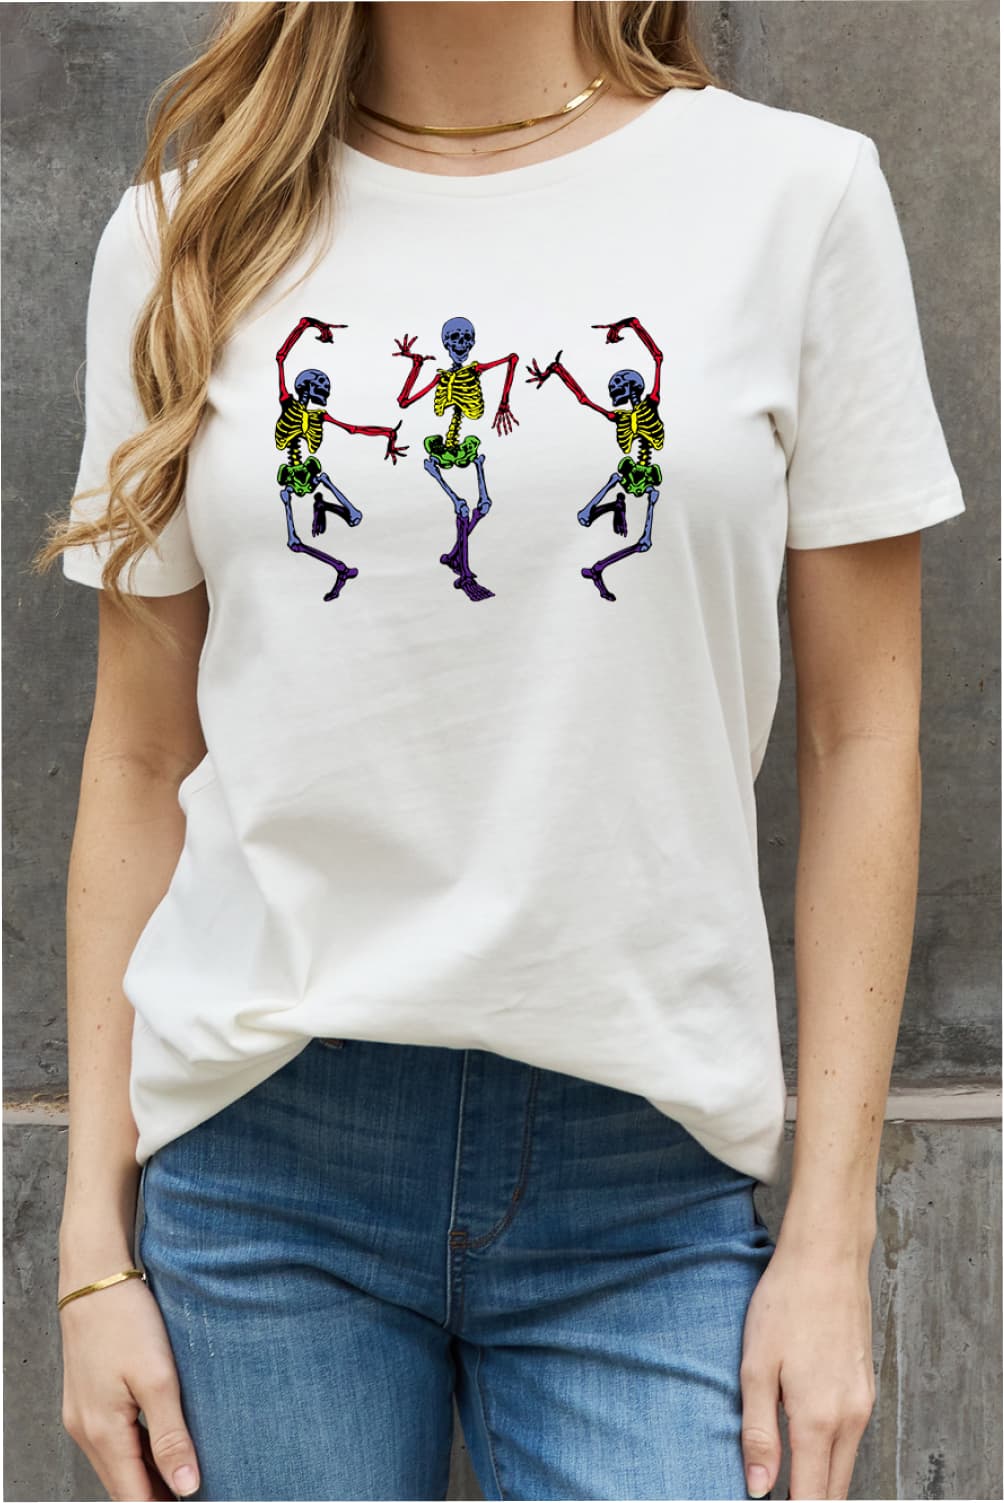 Simply Love Dancing Skeleton Graphic Cotton Tee